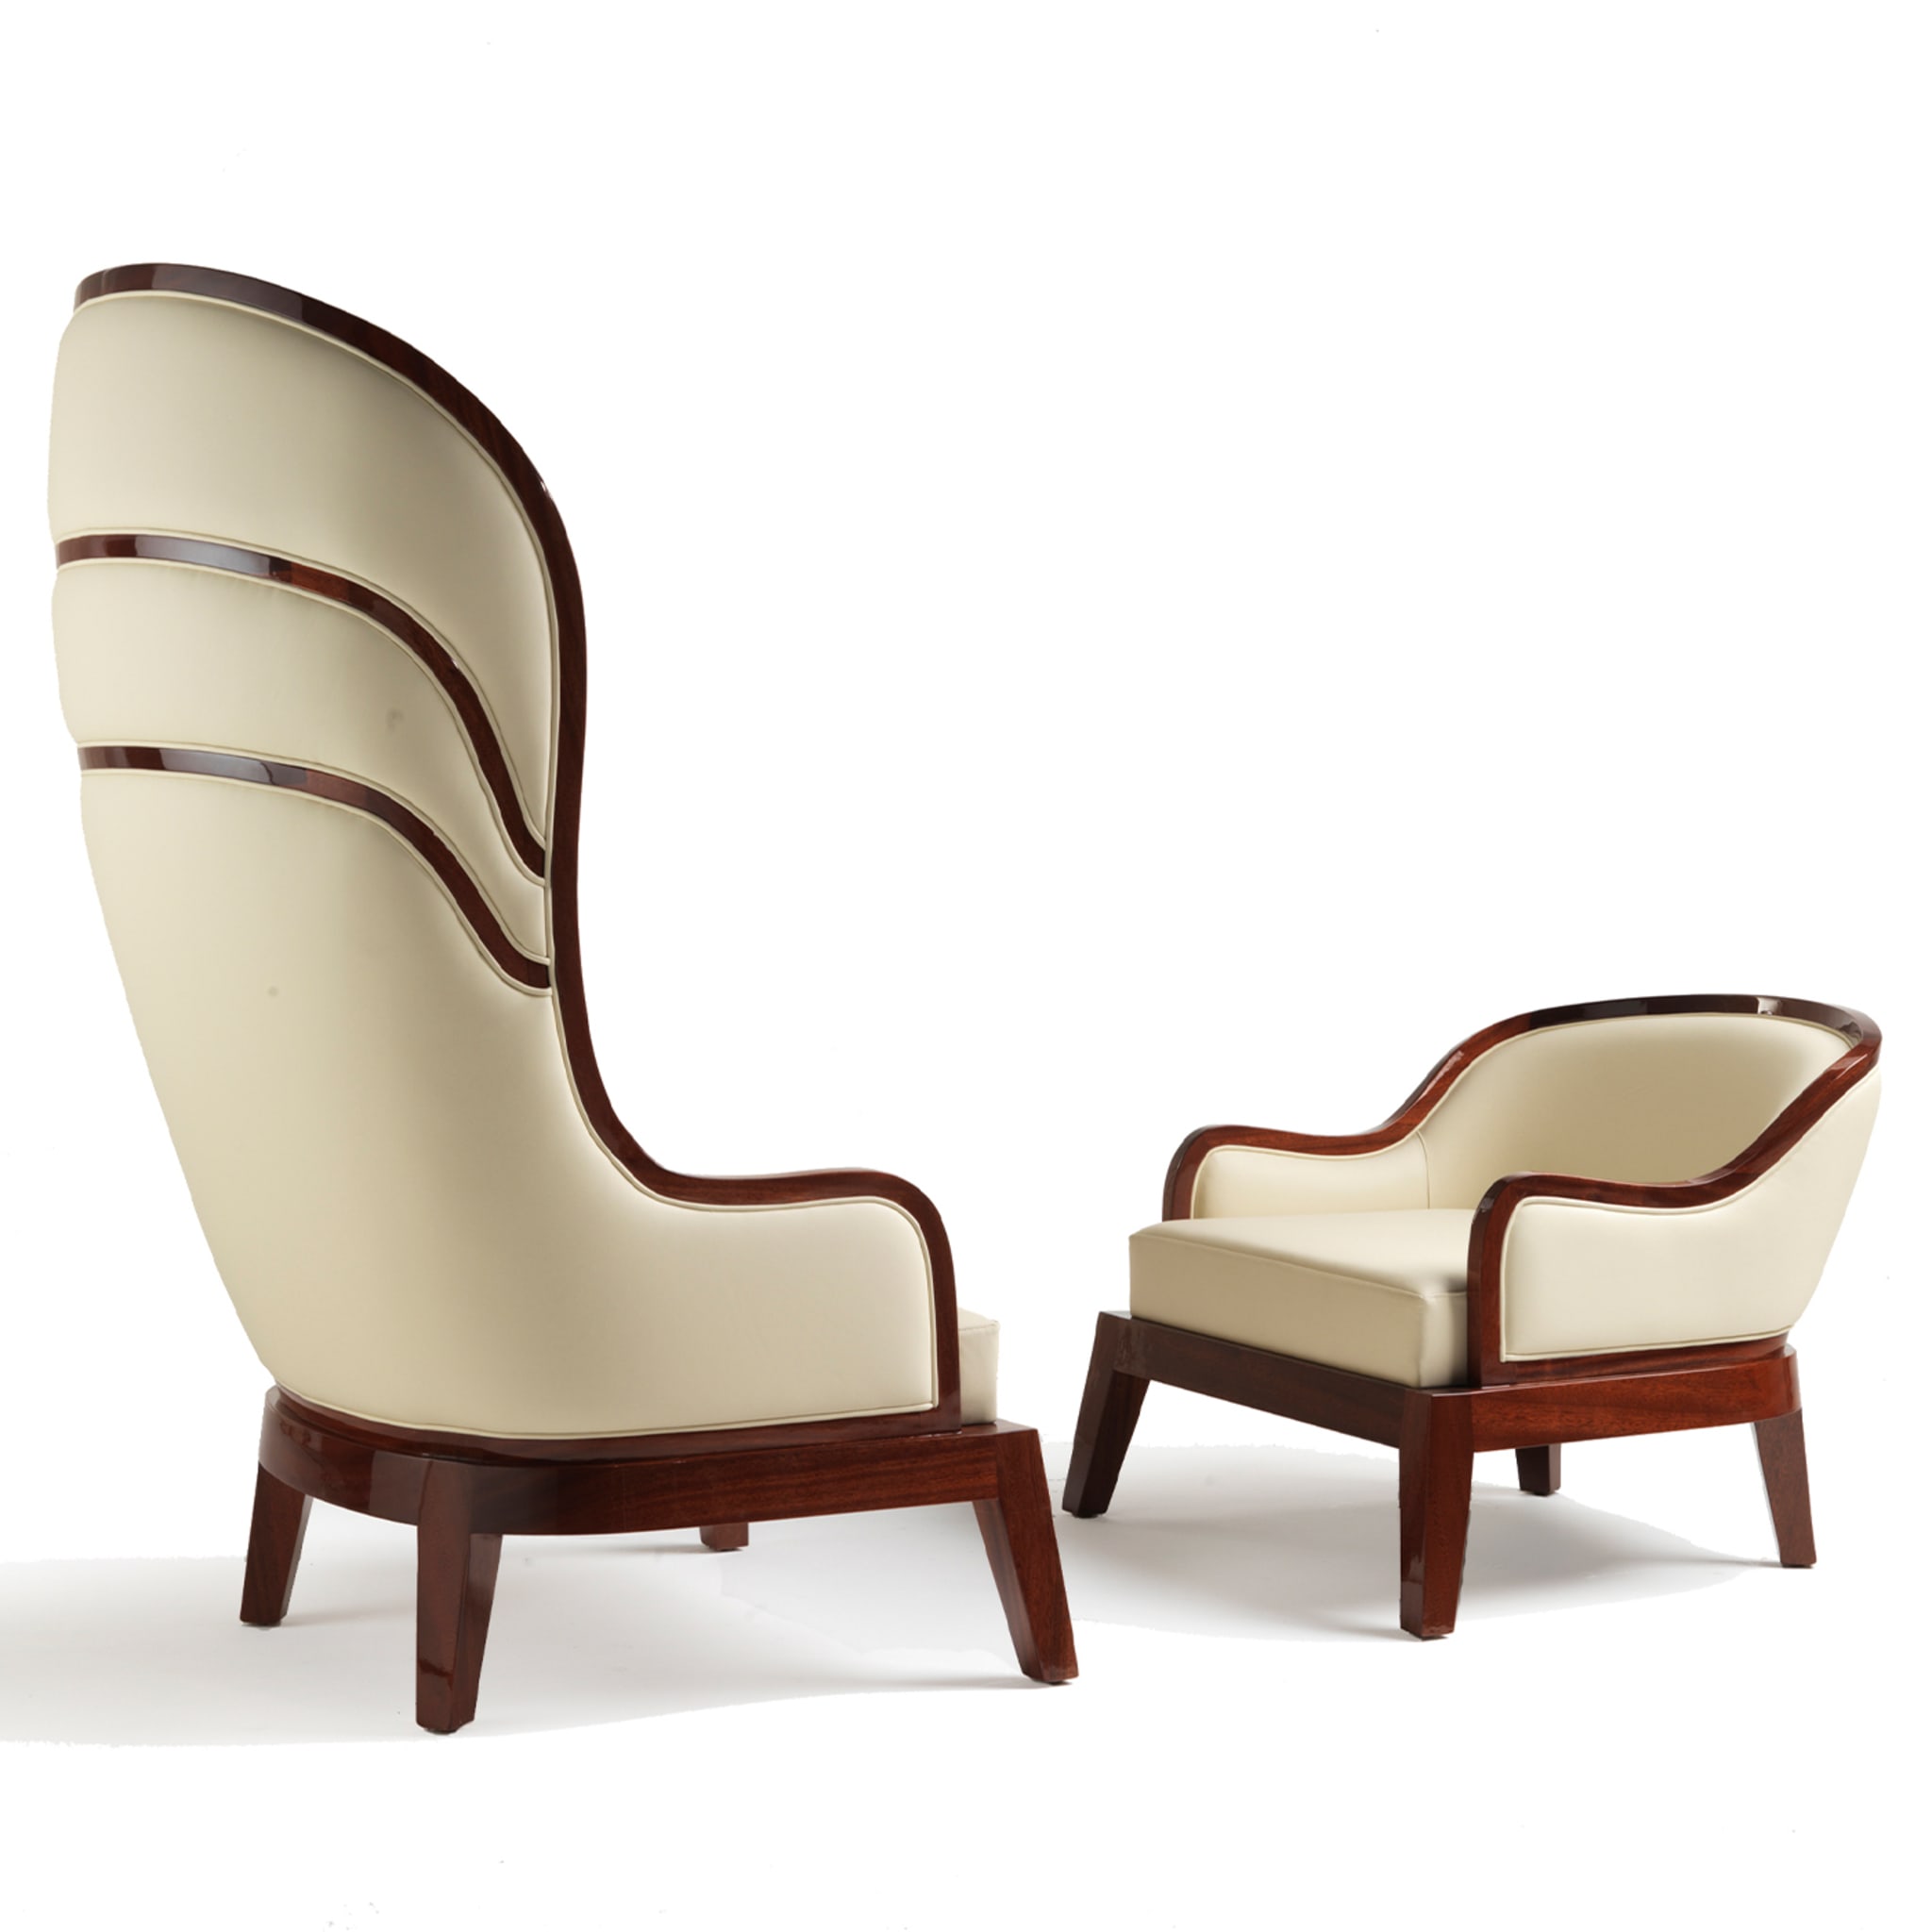 Duchesse of Home White Armchair by Archer Humphryes Architects #2 - Alternative view 1